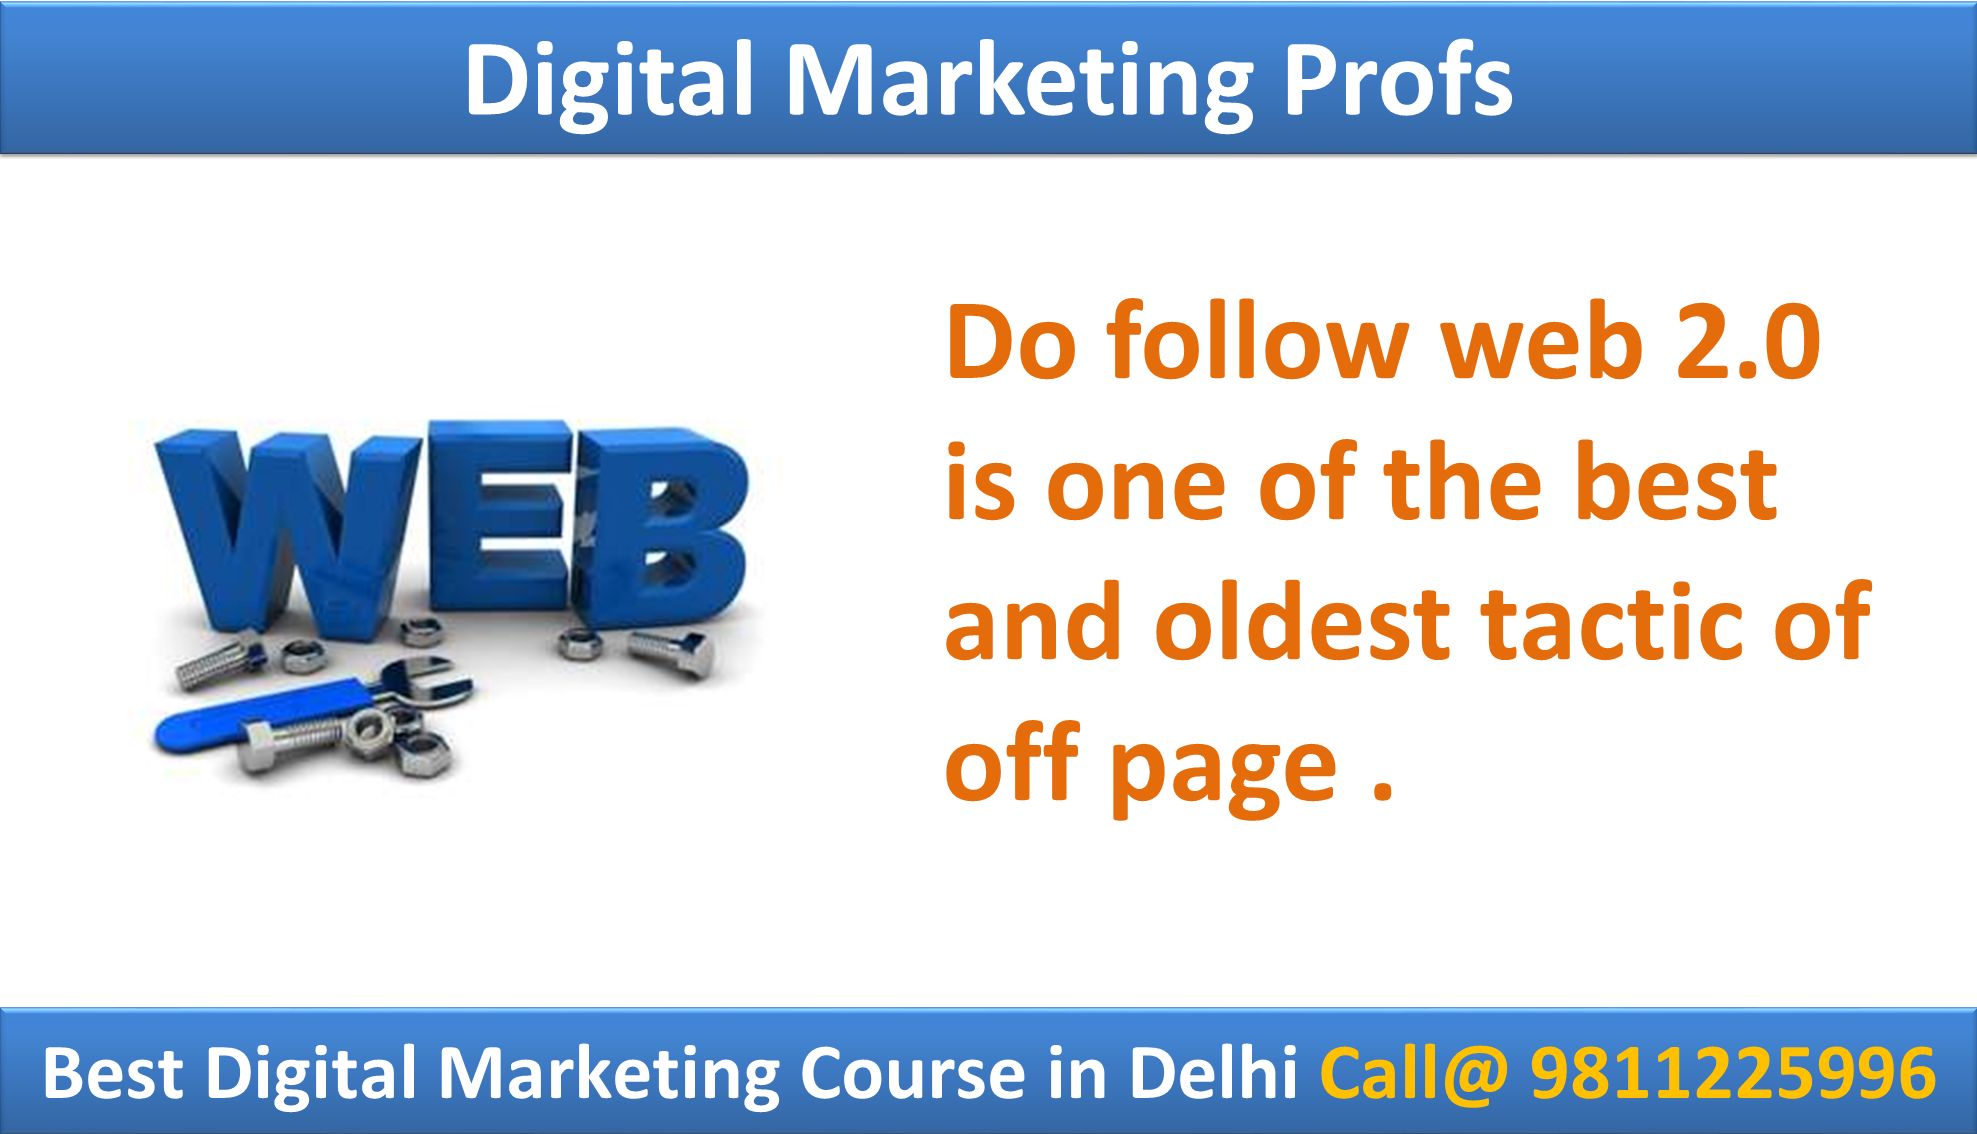 Do follow web 2.0 is one of the best and oldest tactic of off page.